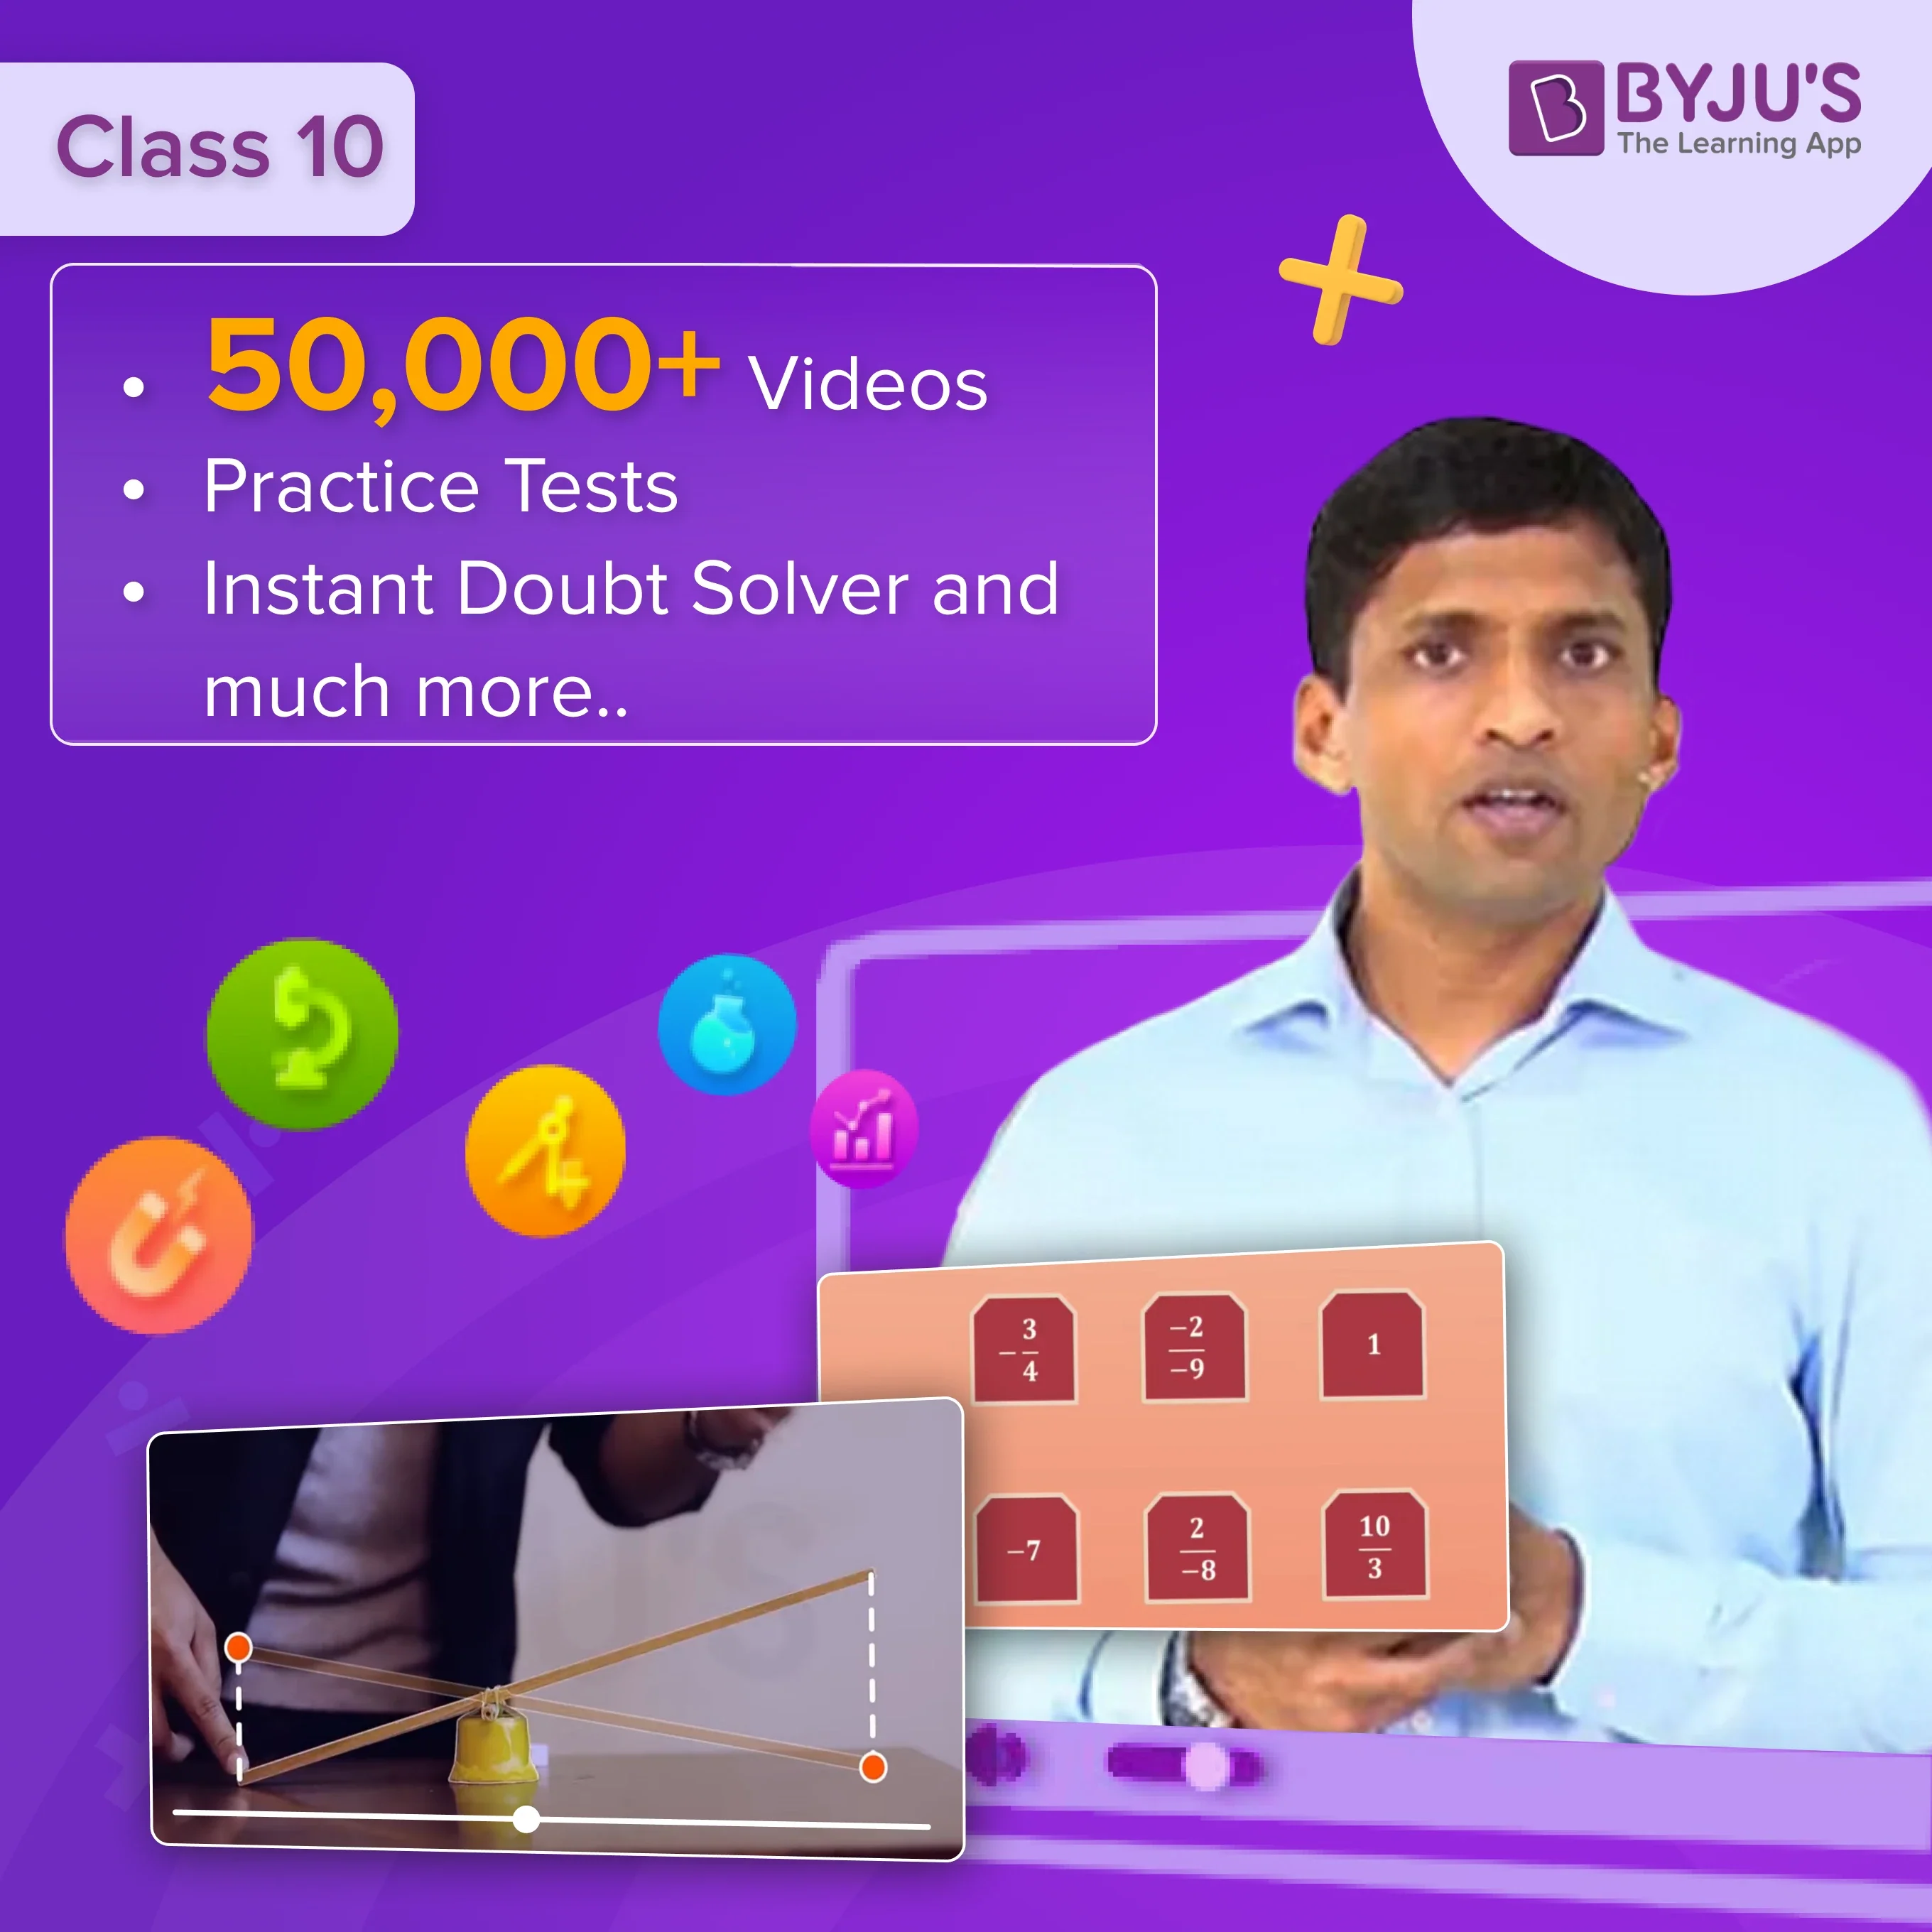 BYJU’S The Learning App - Class 10 (Renewal)